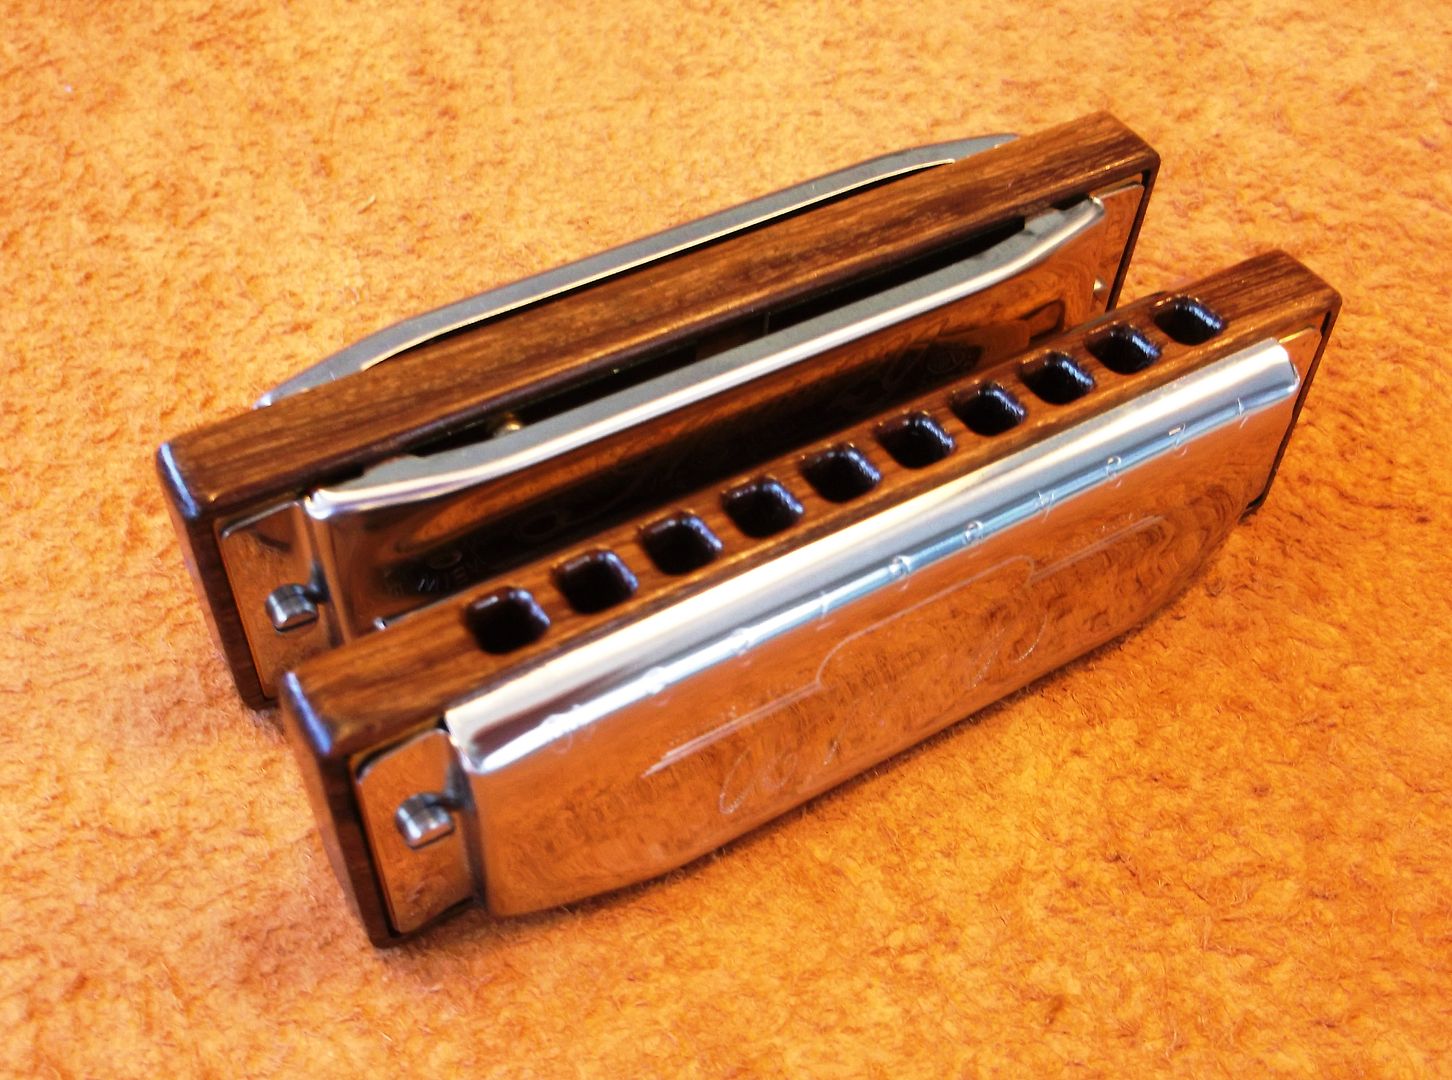 Hohner Special 20's with Milled Rosewood Combs photo DSCF4569_zpsh5db7u0x.jpg